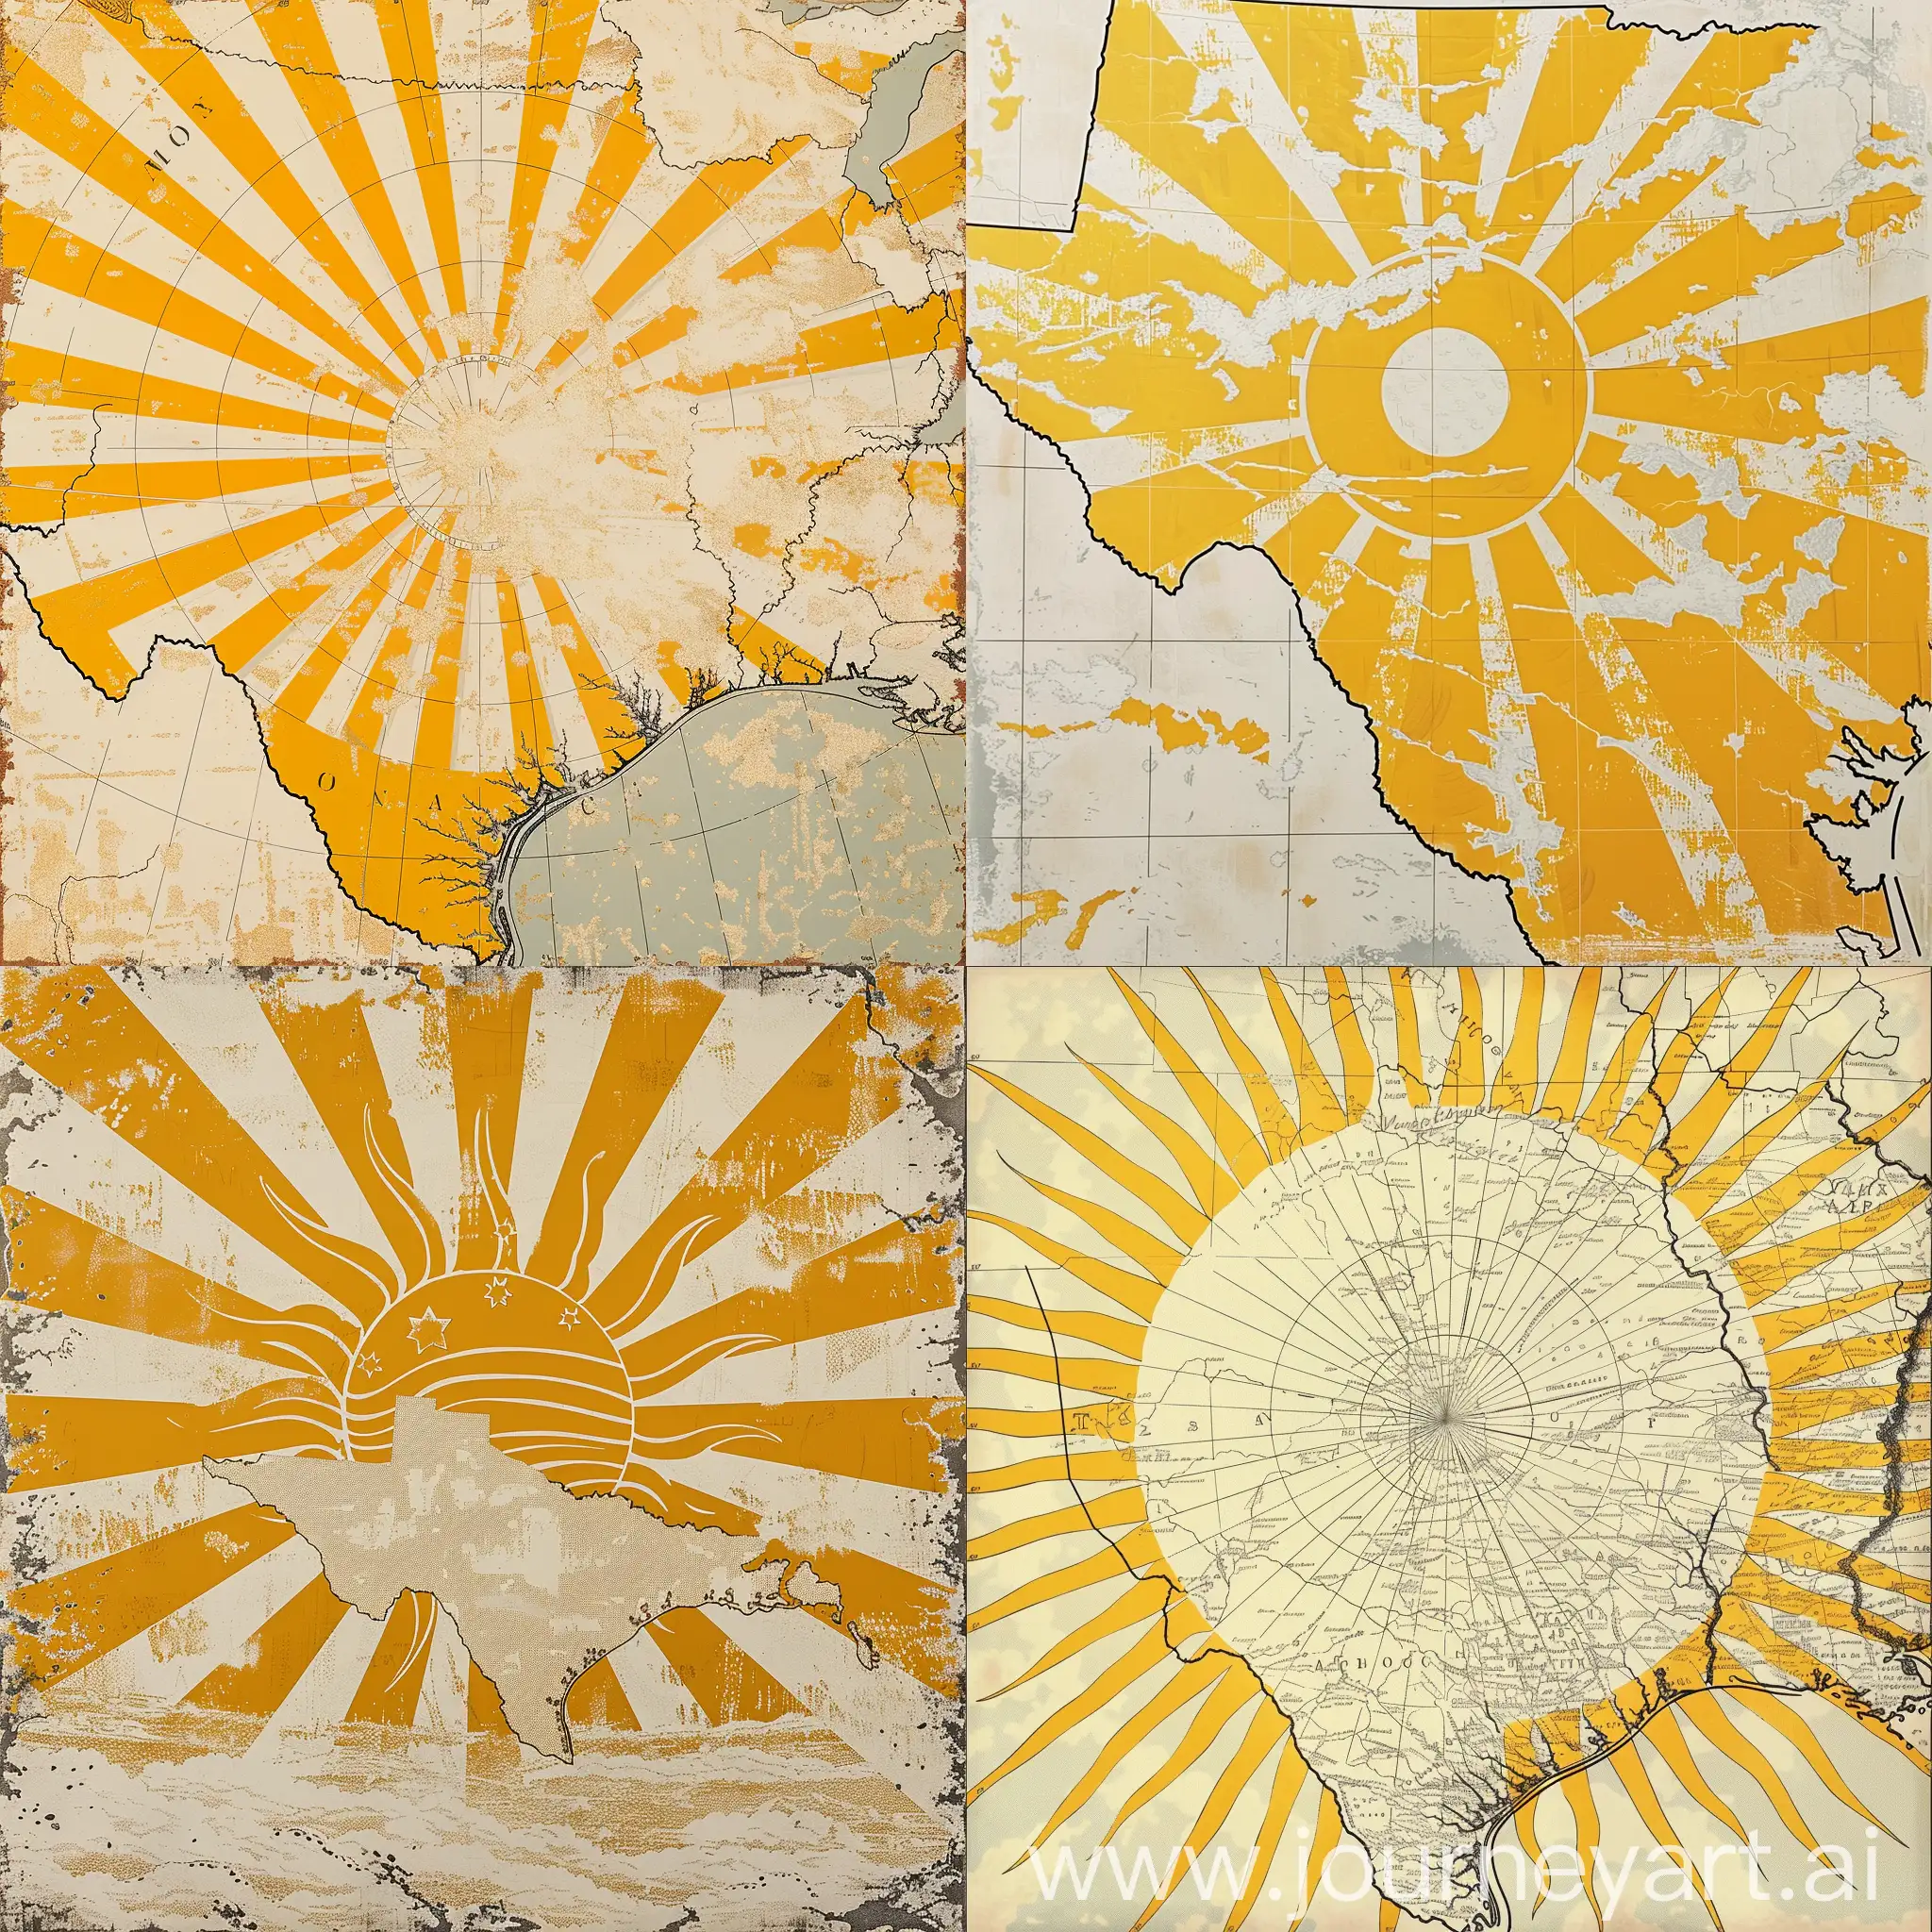 Map of Texas and Oklahoma with a Japanese rising sun pattern in yellow and white, centered at Wichita Falls, Texas.